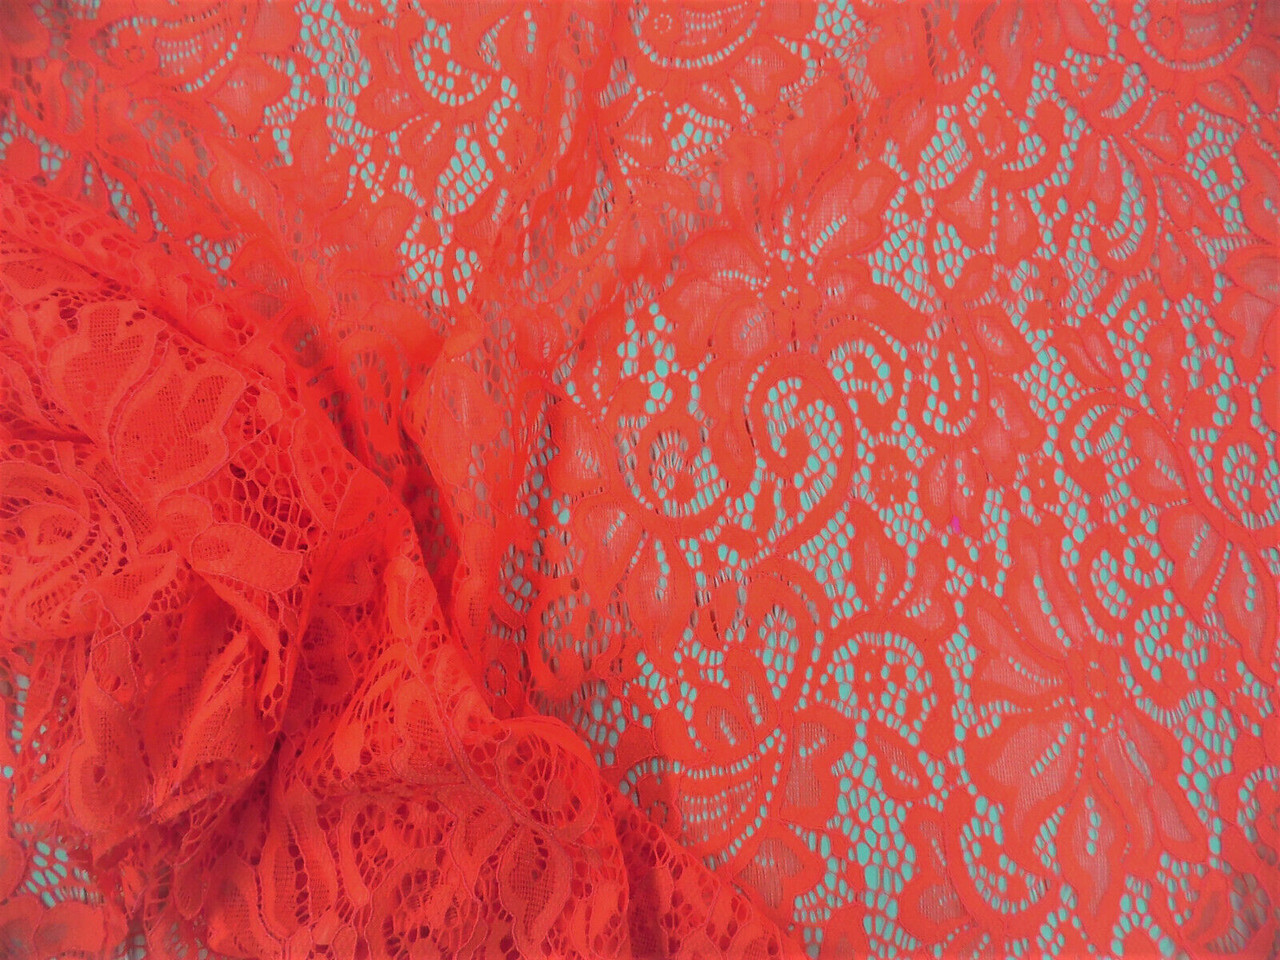 Stretch Lace Apparel Fabric Sheer Paisley Floral Neon Orange Coral TT202